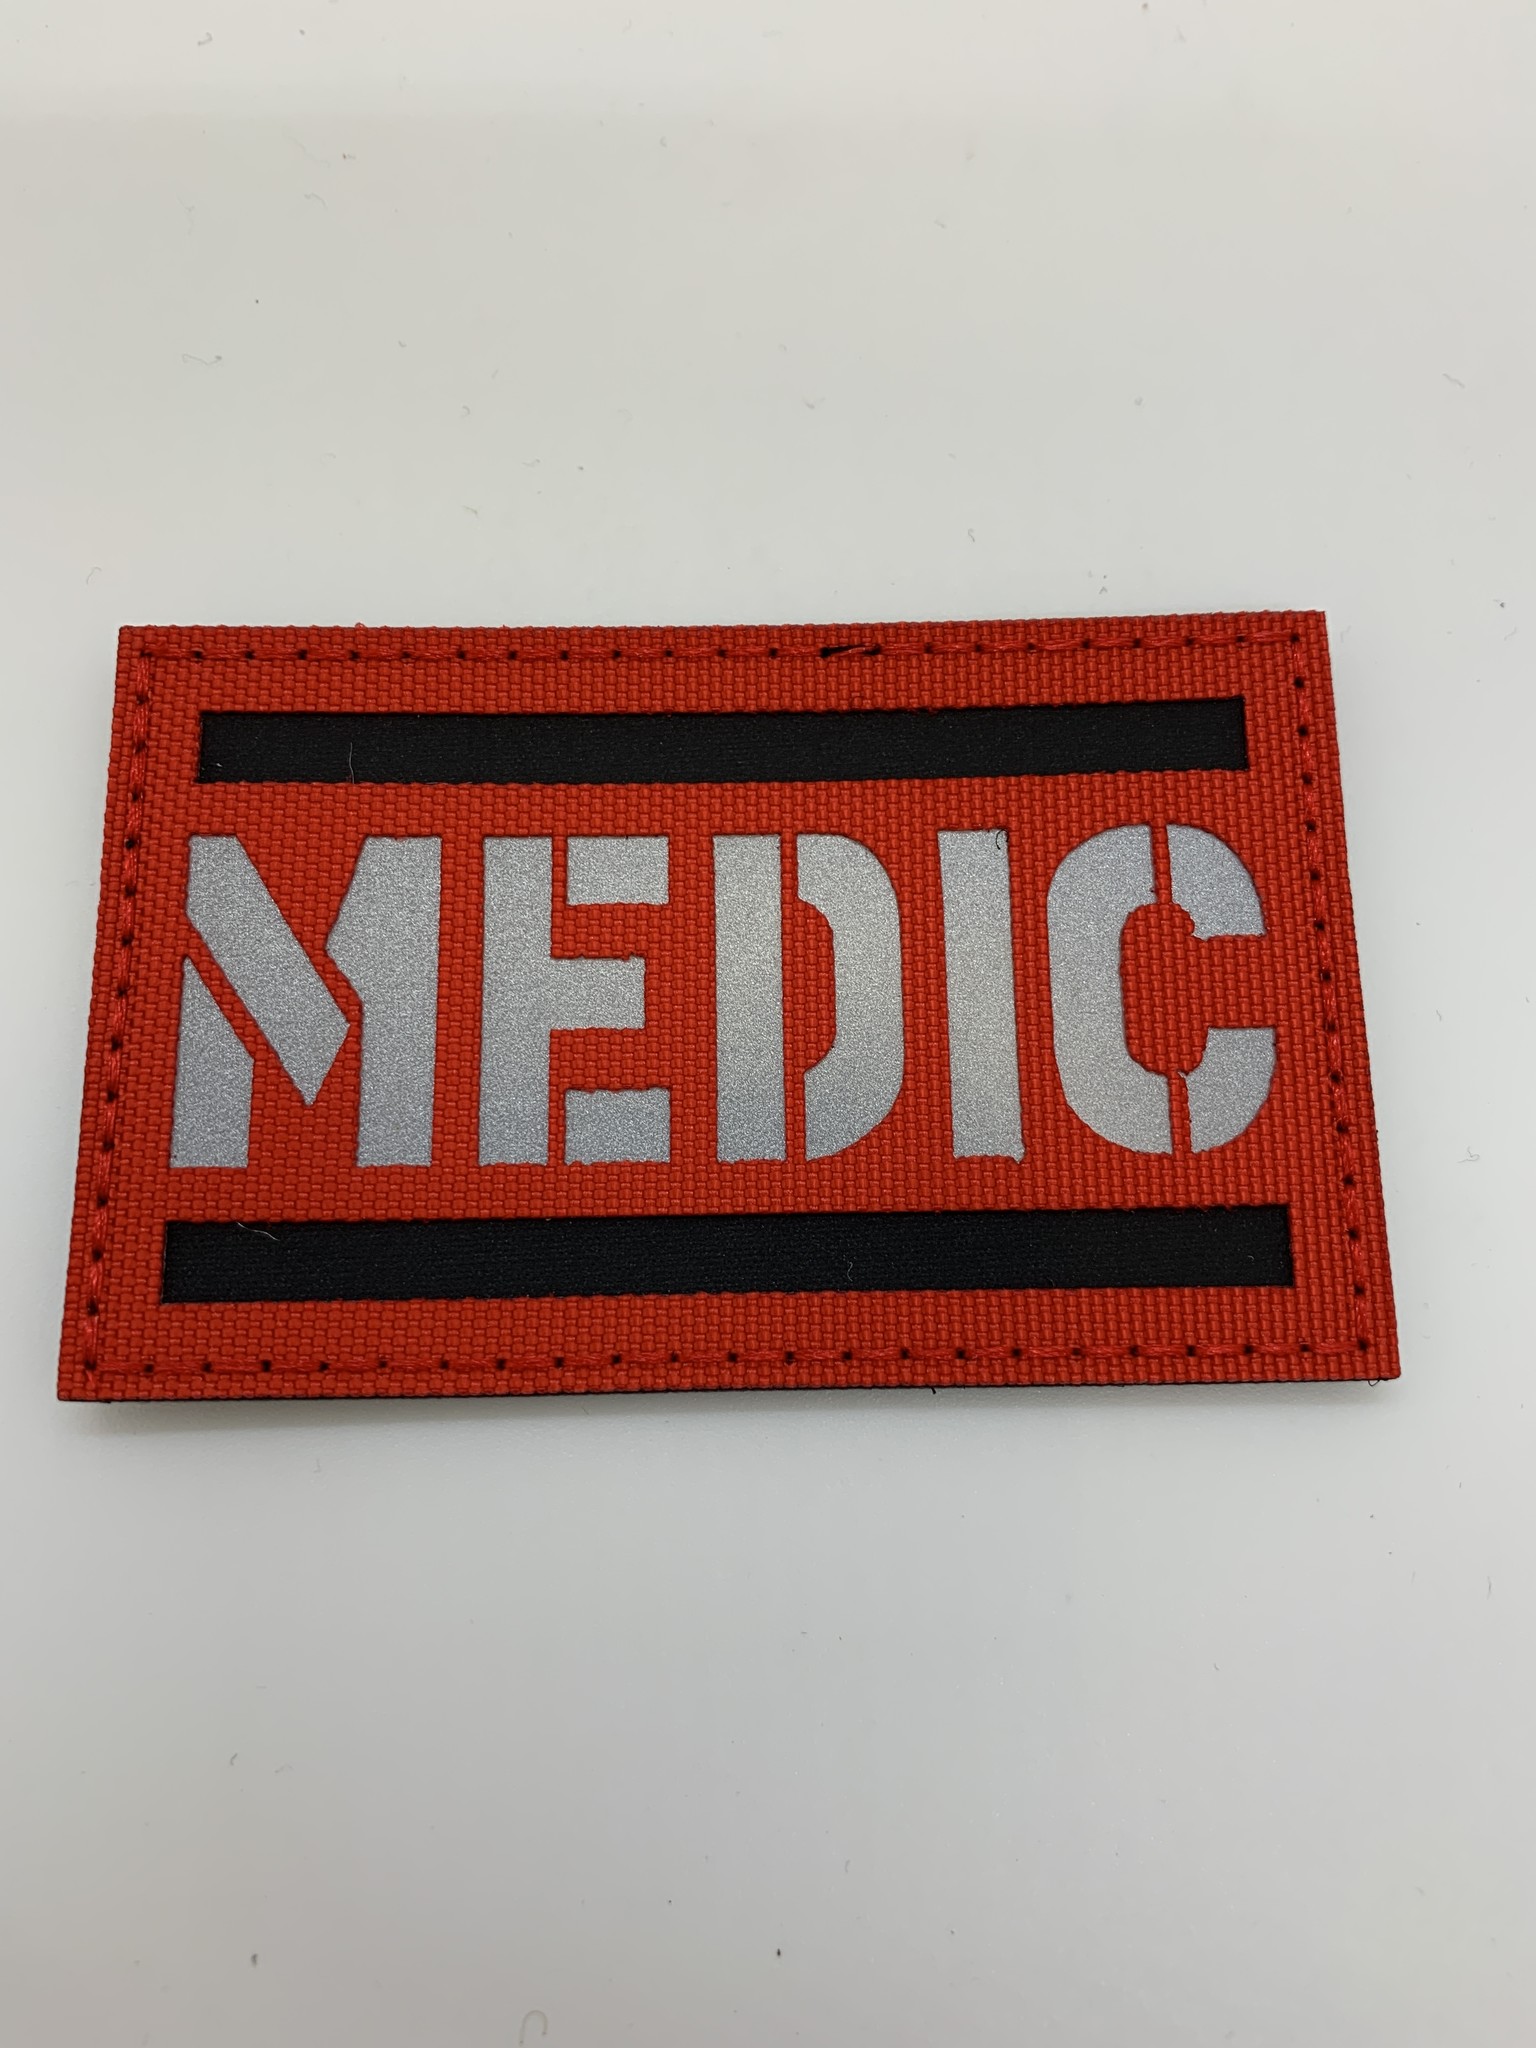 Ouch Pouch Tactical Medic Patch (2-Pack) | Hook & Loop Medical EMT Patch for Identifying First Aid Kit Instead of Red Cross, Funny Tactical Patches